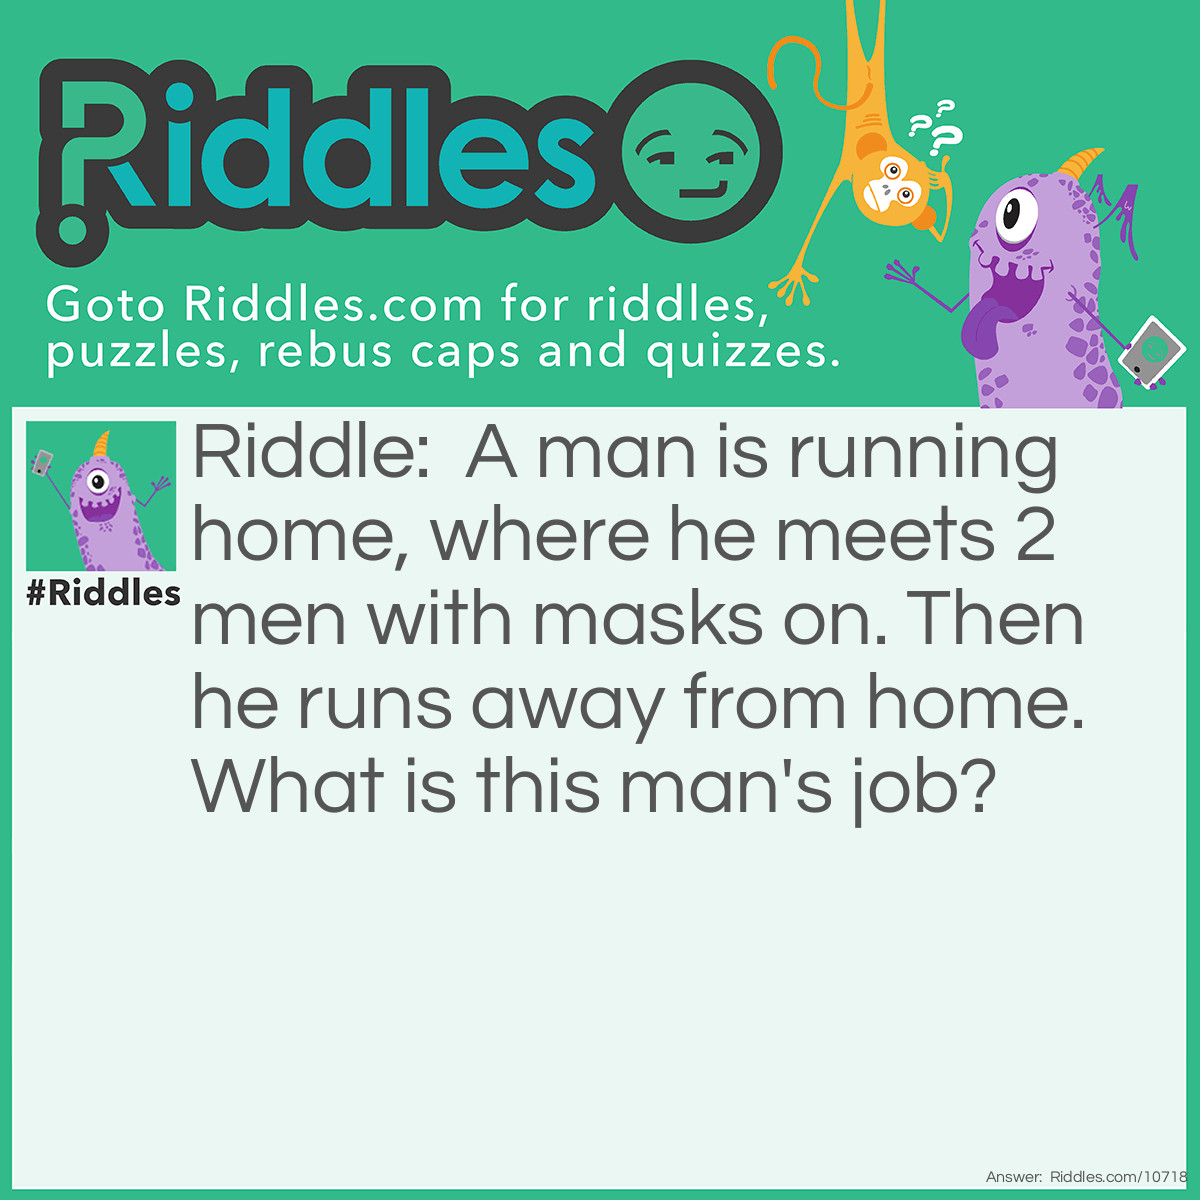 Riddle: A man is running home, where he meets 2 men with masks on. Then he runs away from home. What is this man's job? Answer: A baseball player. The 2 masked men are the umpire and the catcher.